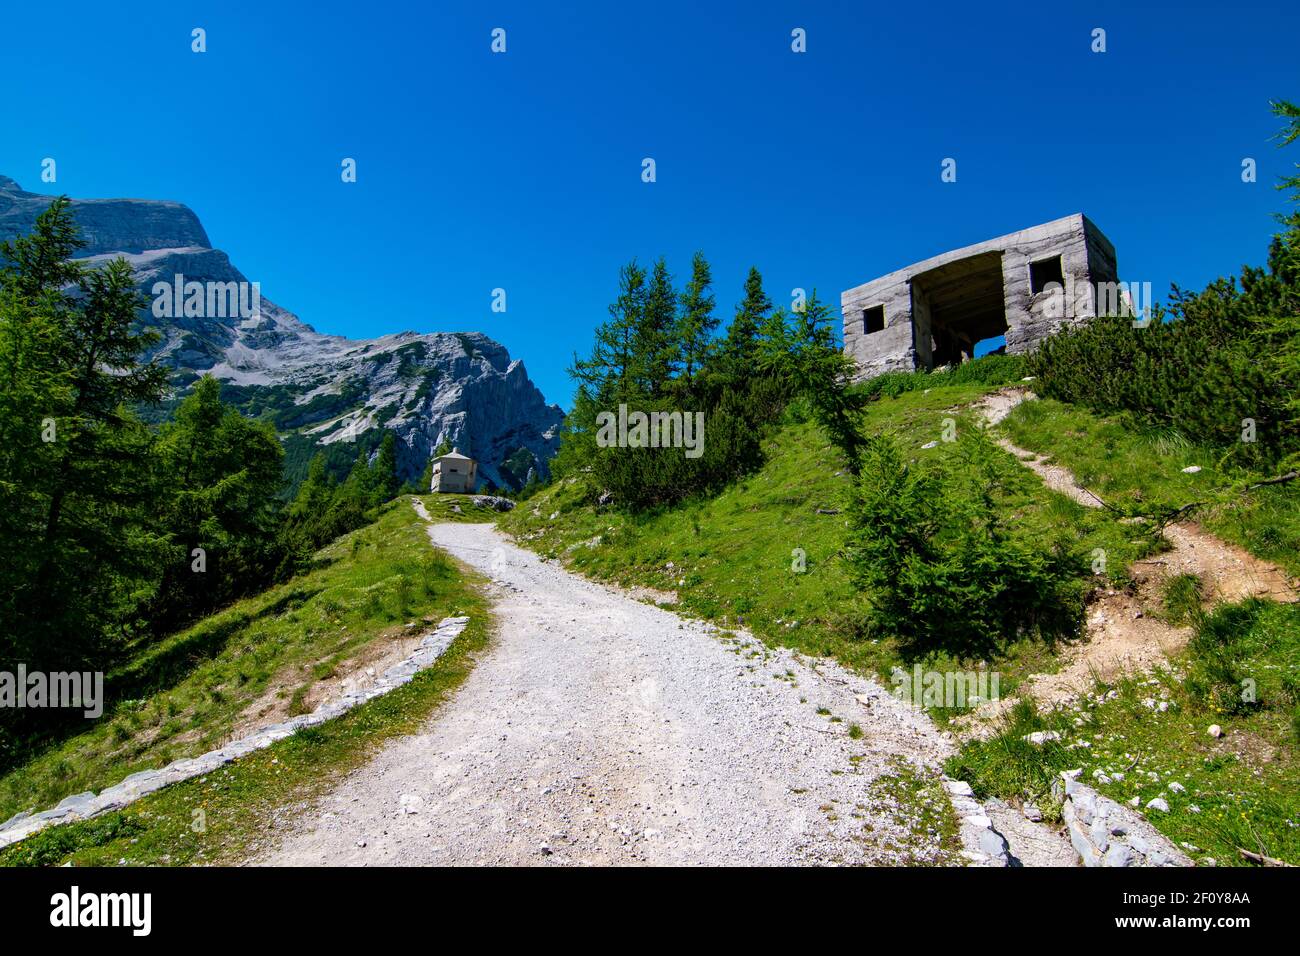 Bunkers from original italian border on the way to Vrsic viewpoint, Vrsic pass, Slovenia Stock Photo